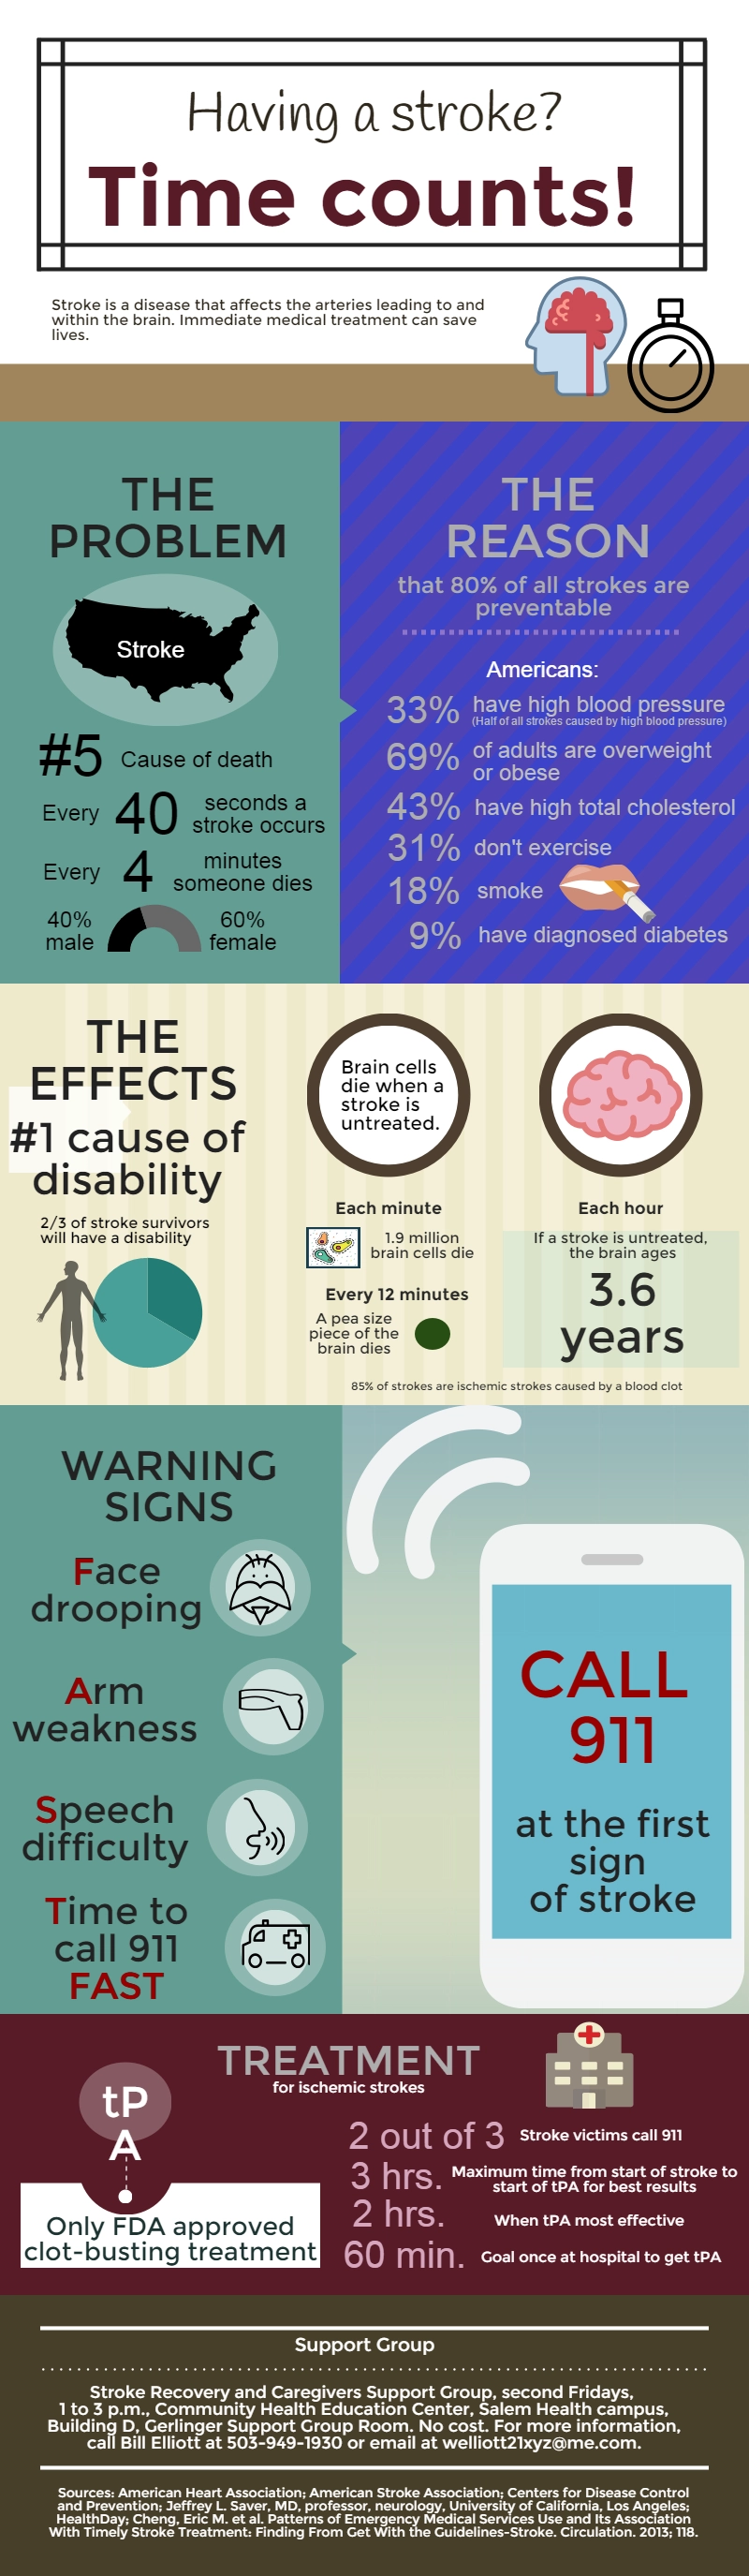 Stroke time infographic